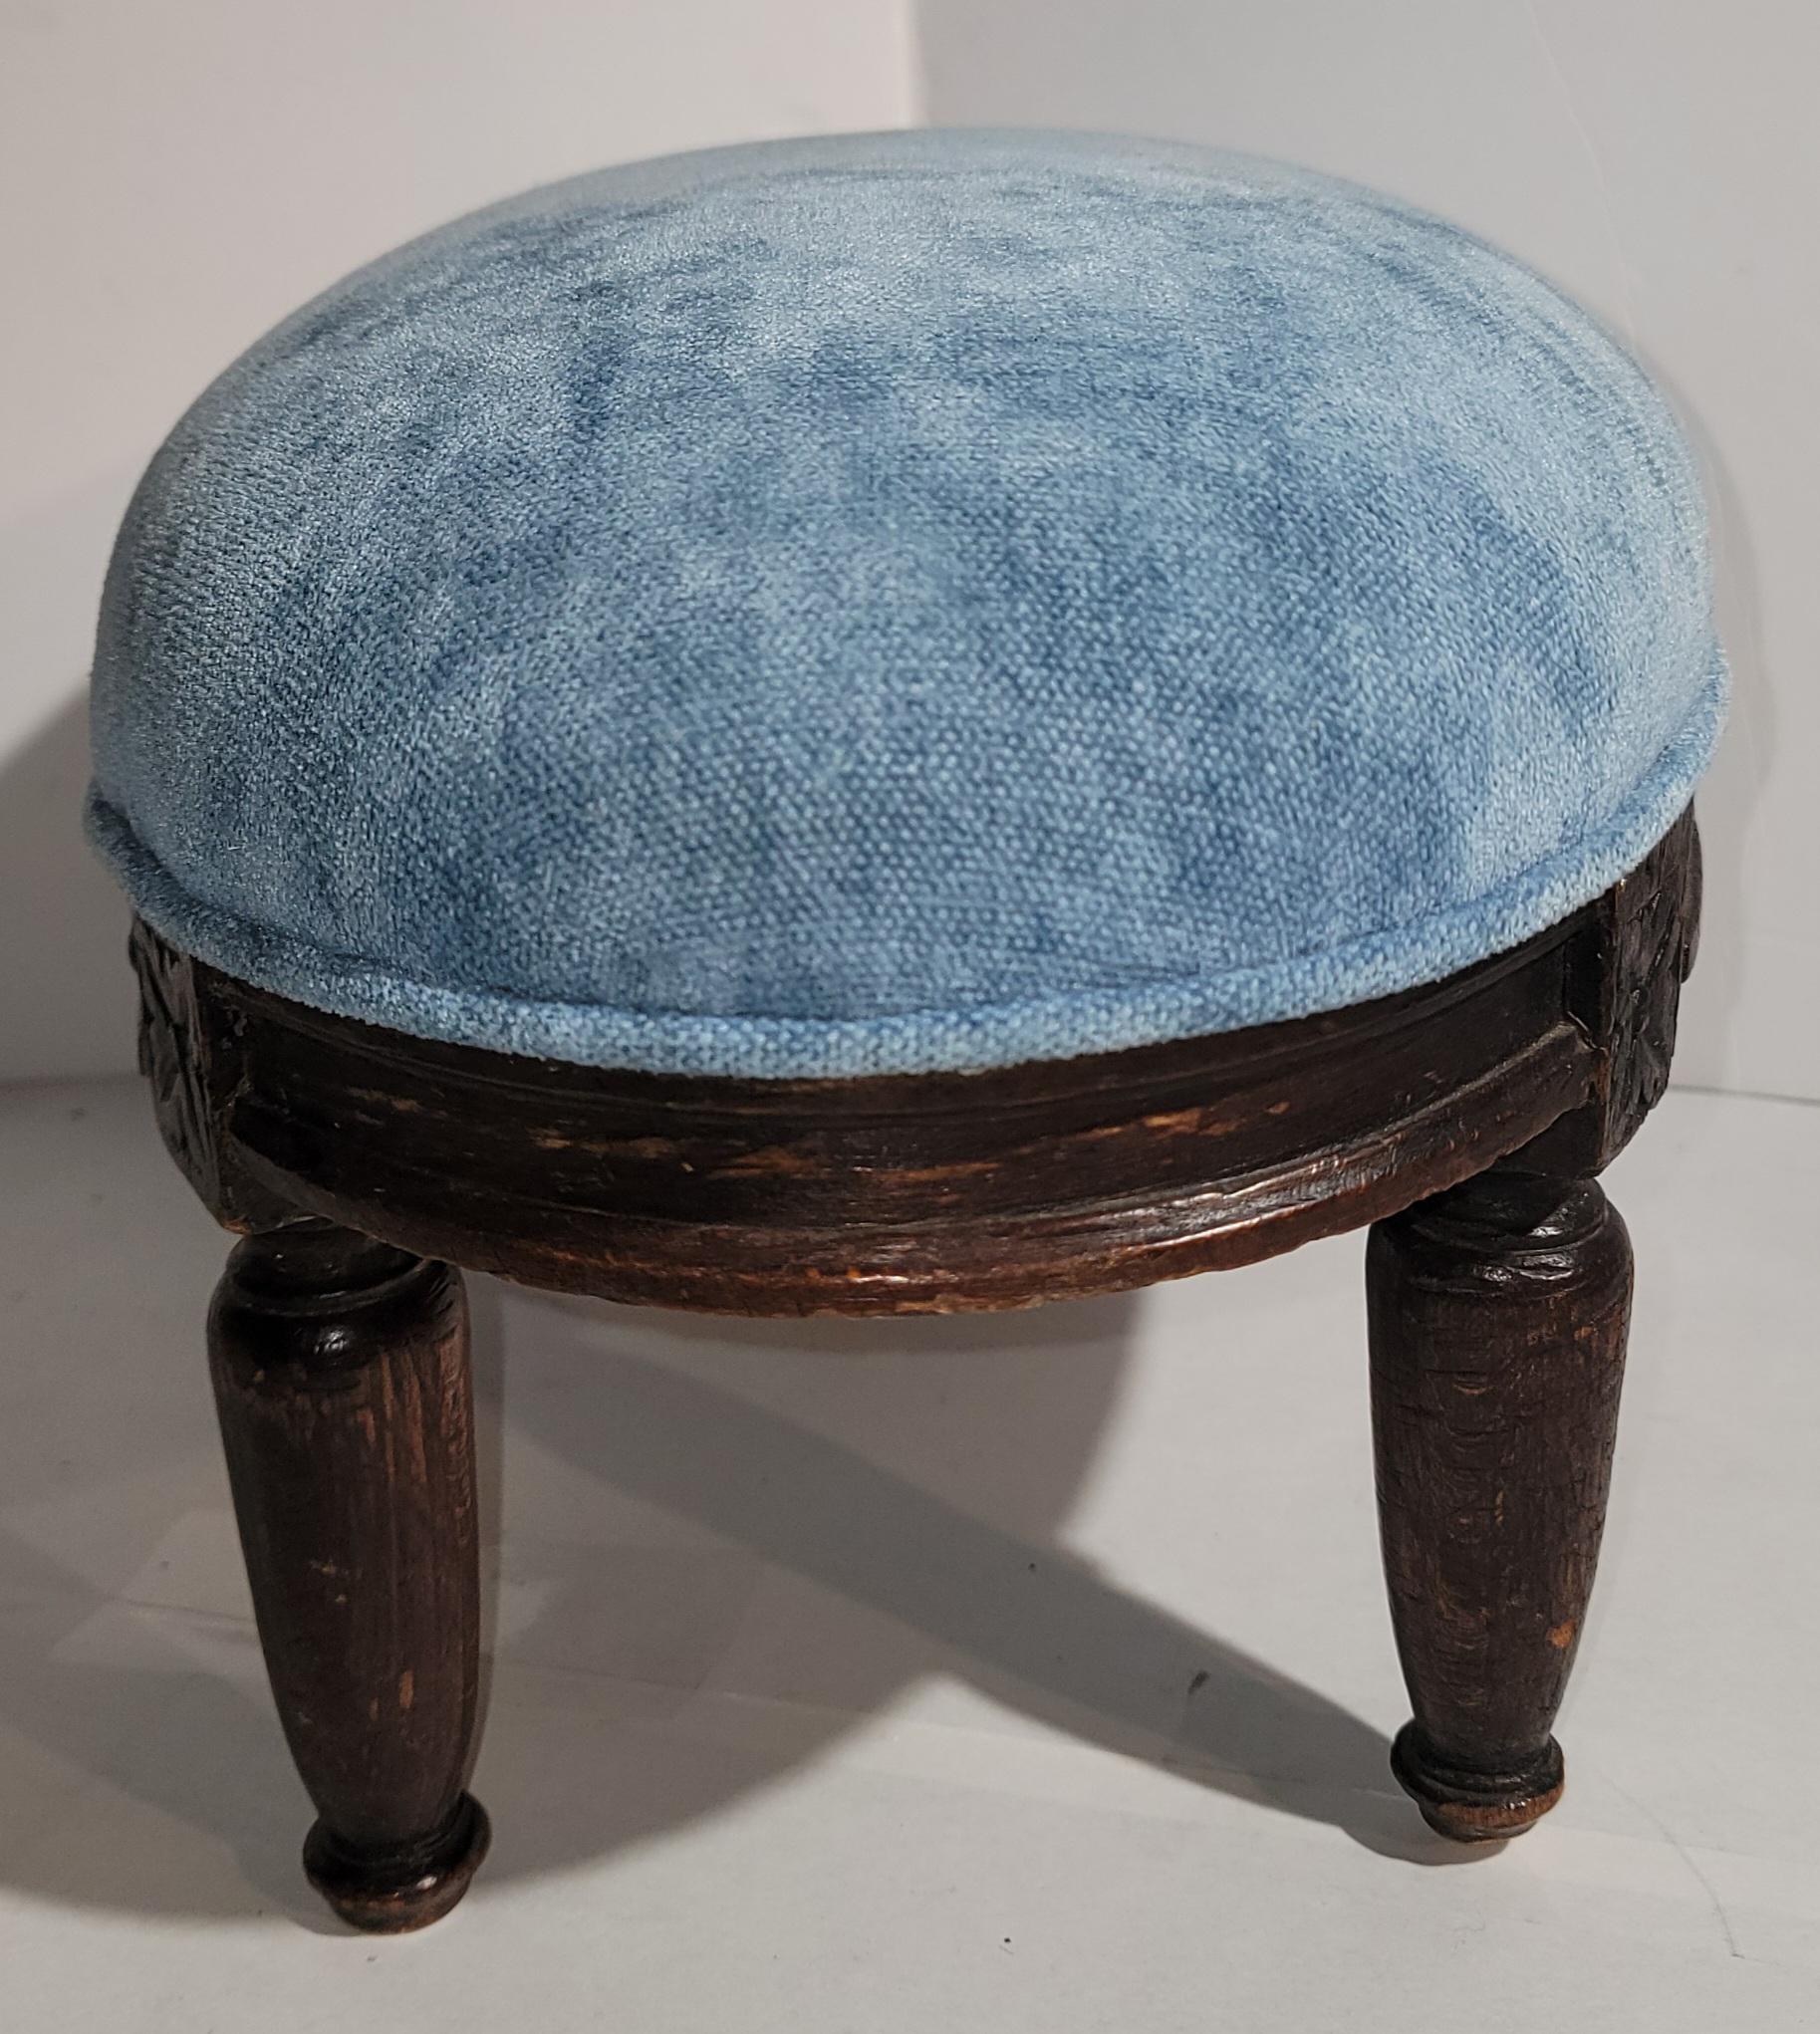 Beautiful foot stool, wooden design with original stain. The vintage velvet fabric is clean. This foot stool has wear to the legs from age and use, very minor wear.  A beautiful puffy oval foot stool. 